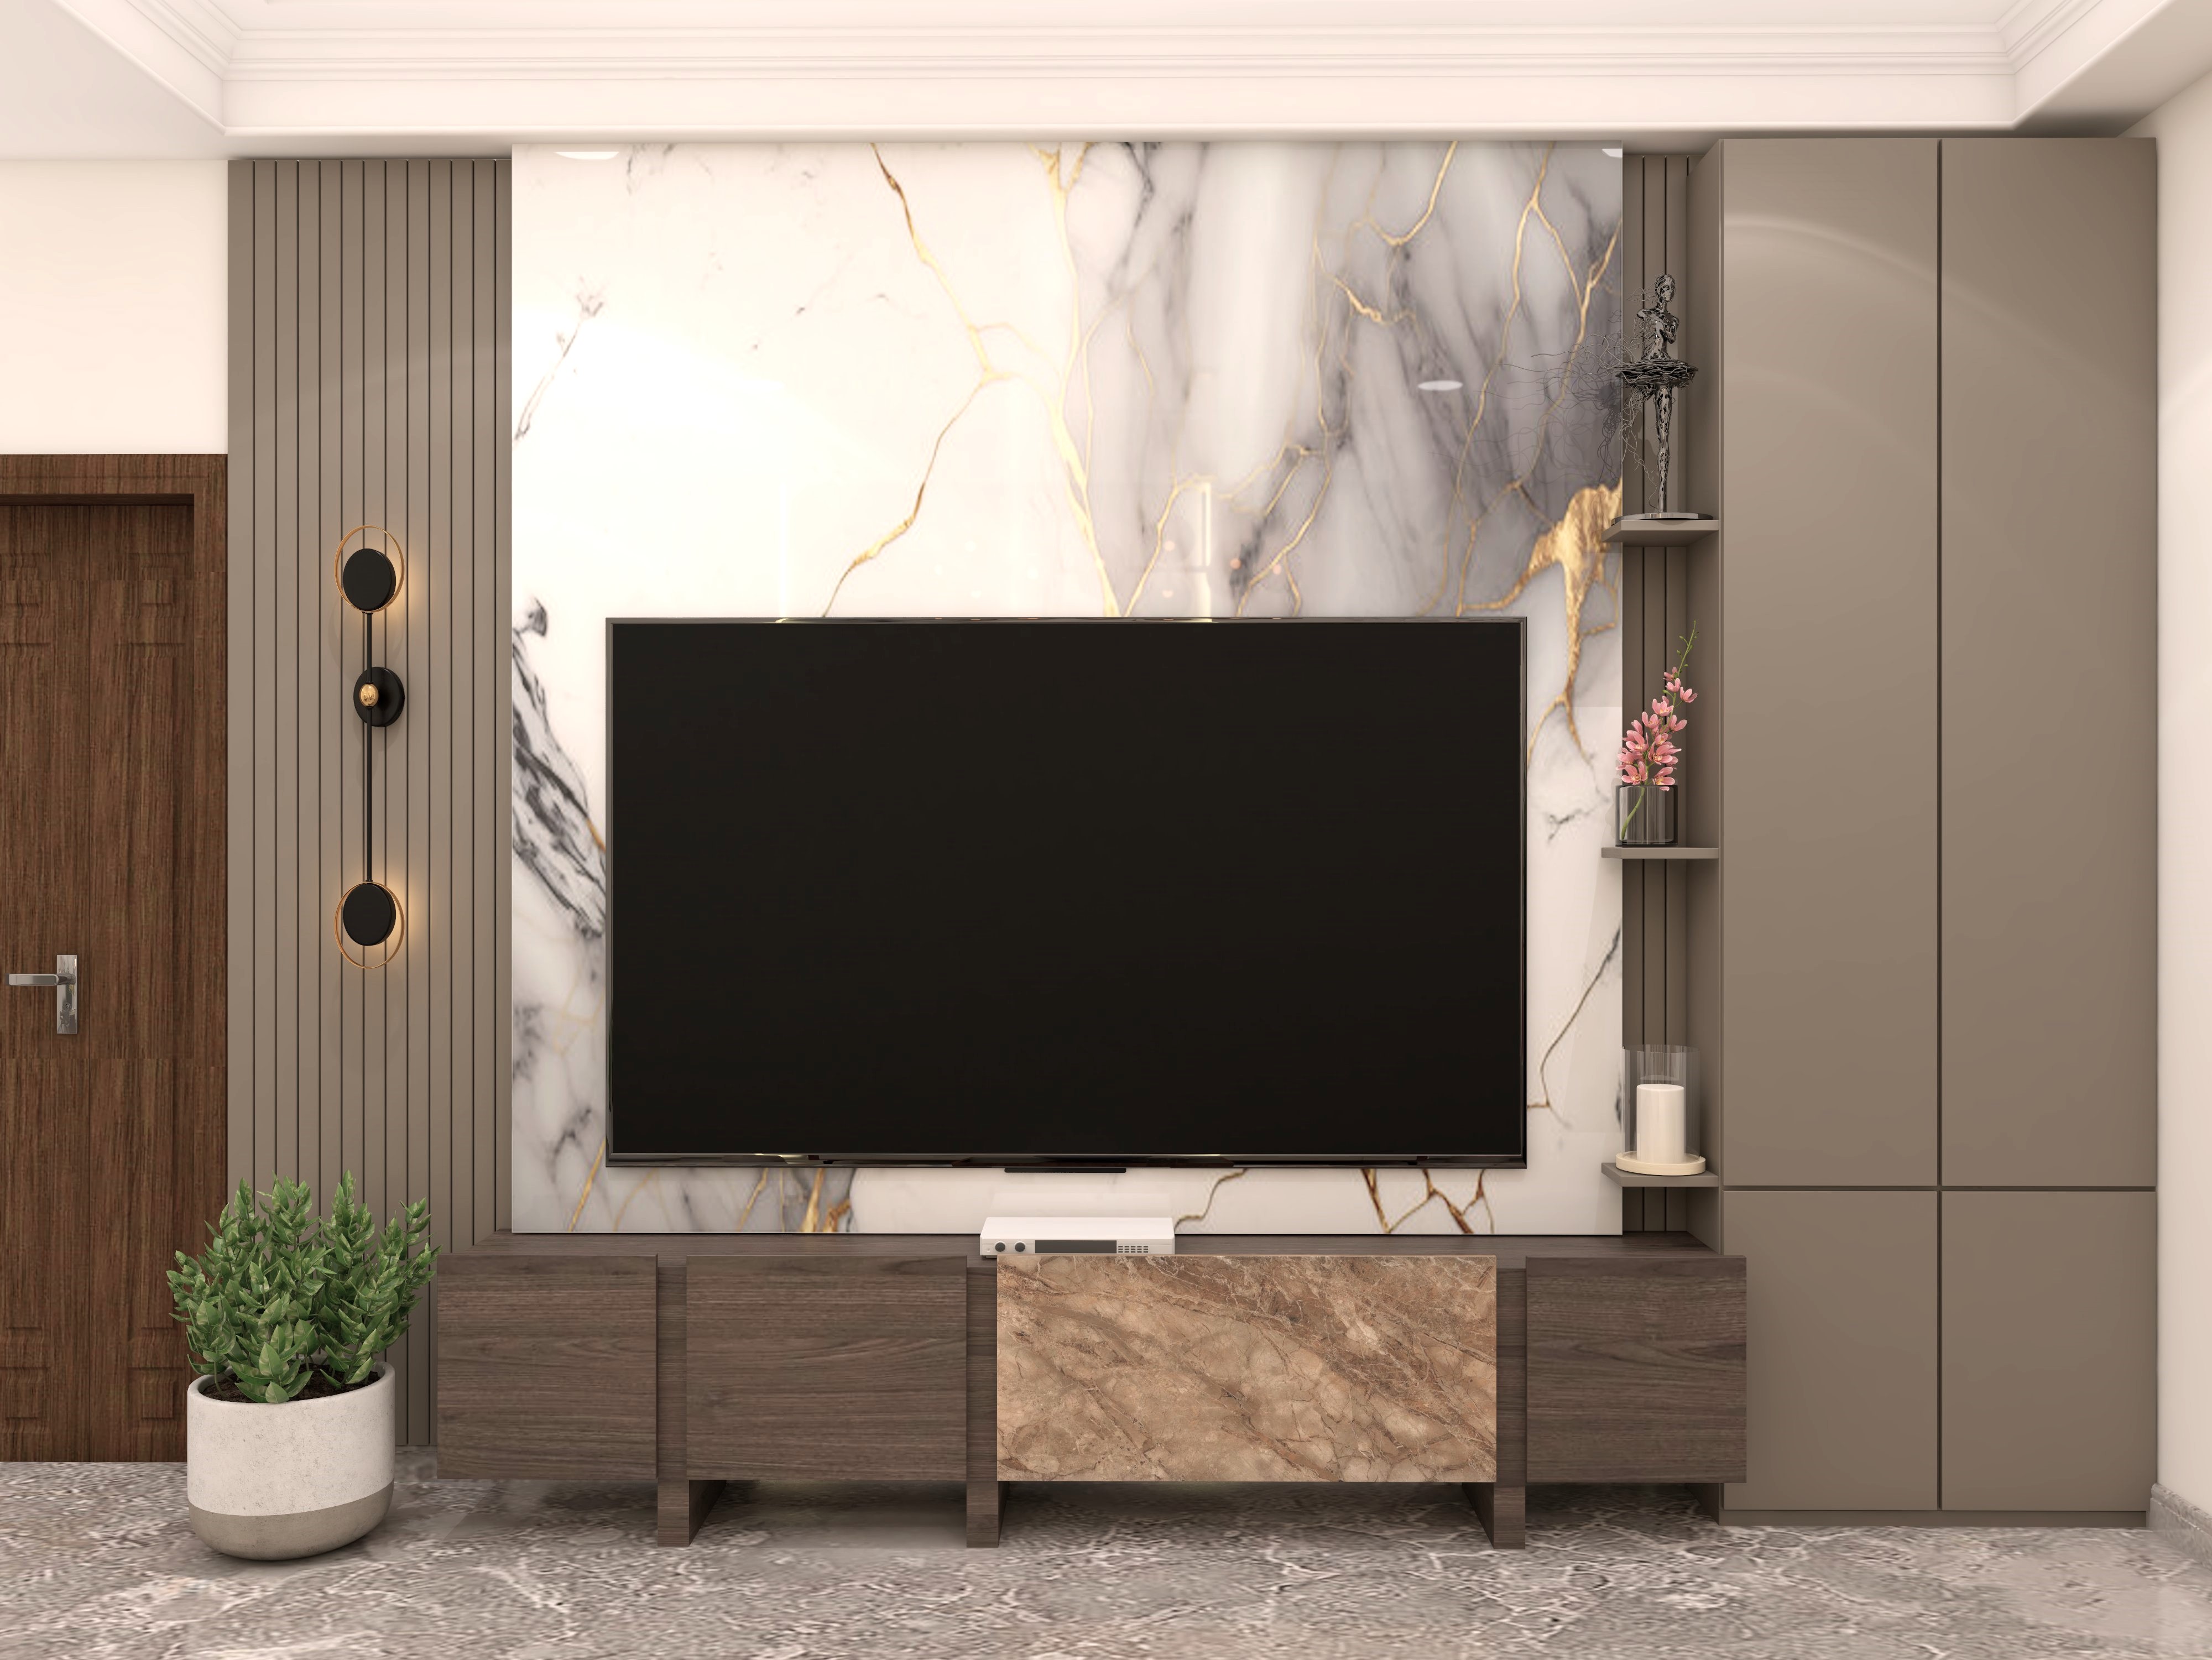 Luxury TV unit with marble wall tile and wooden console-Beautiful Homes